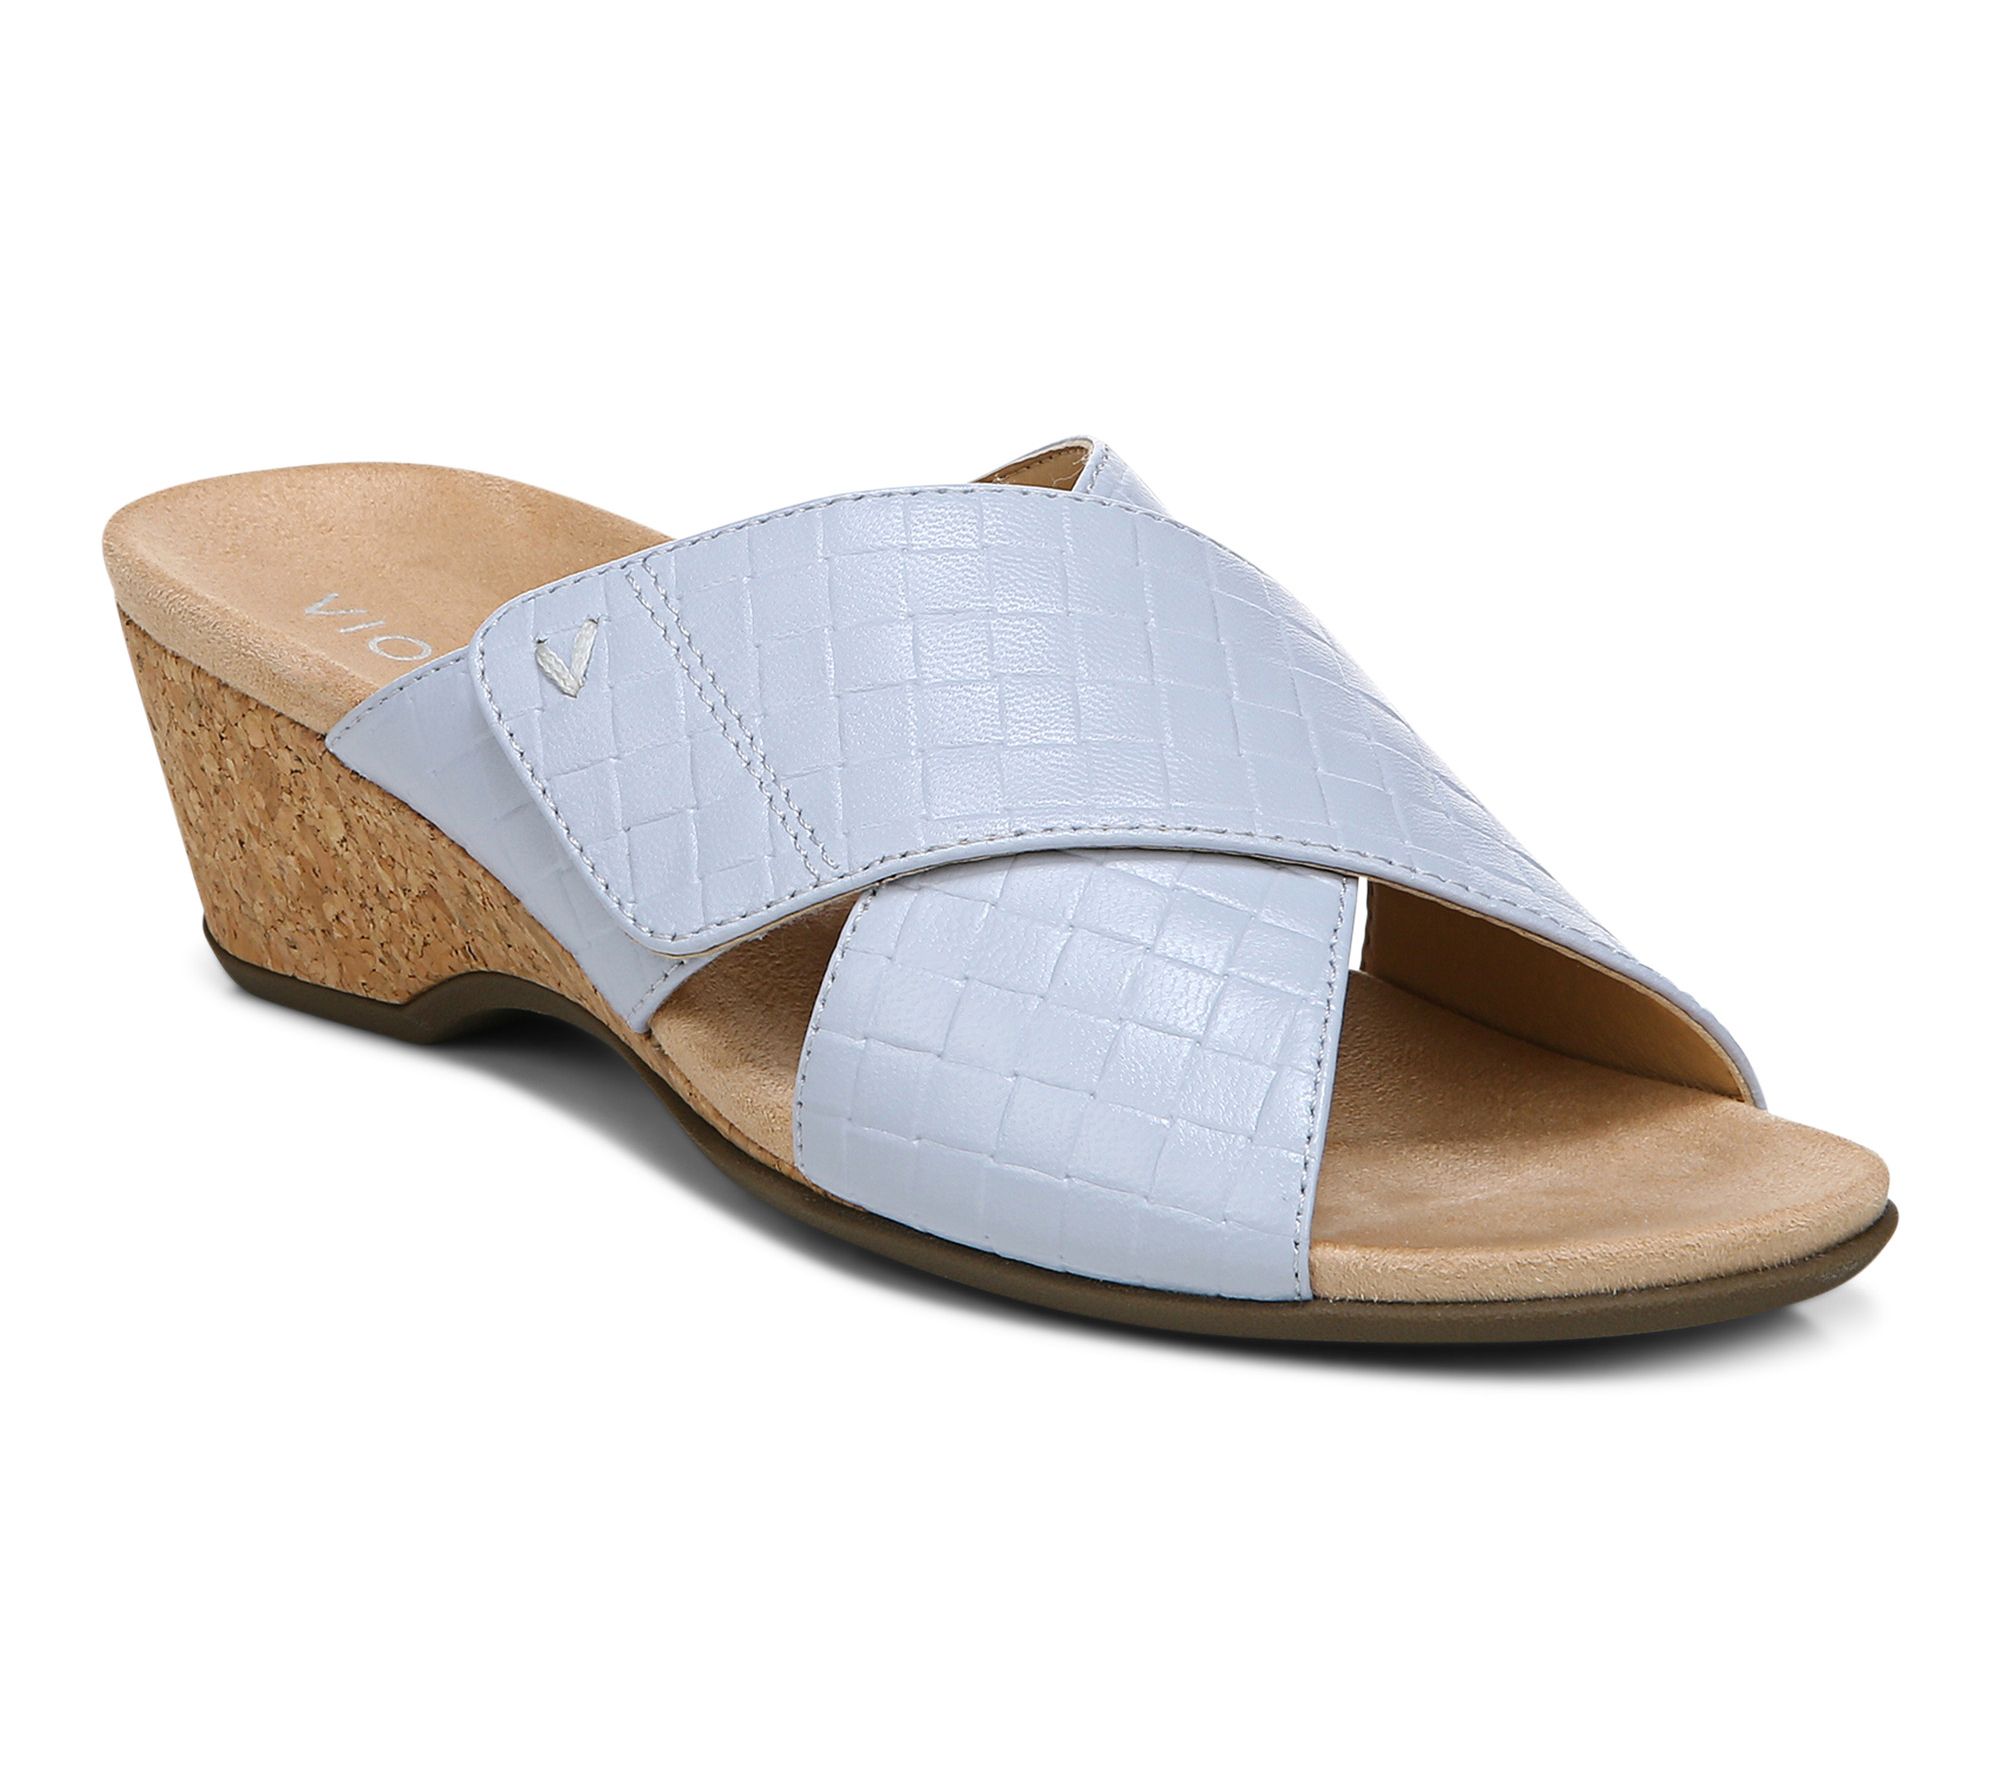 Vionic Leather Embossed_Woven Wedge Sandals Leticia - QVC.com